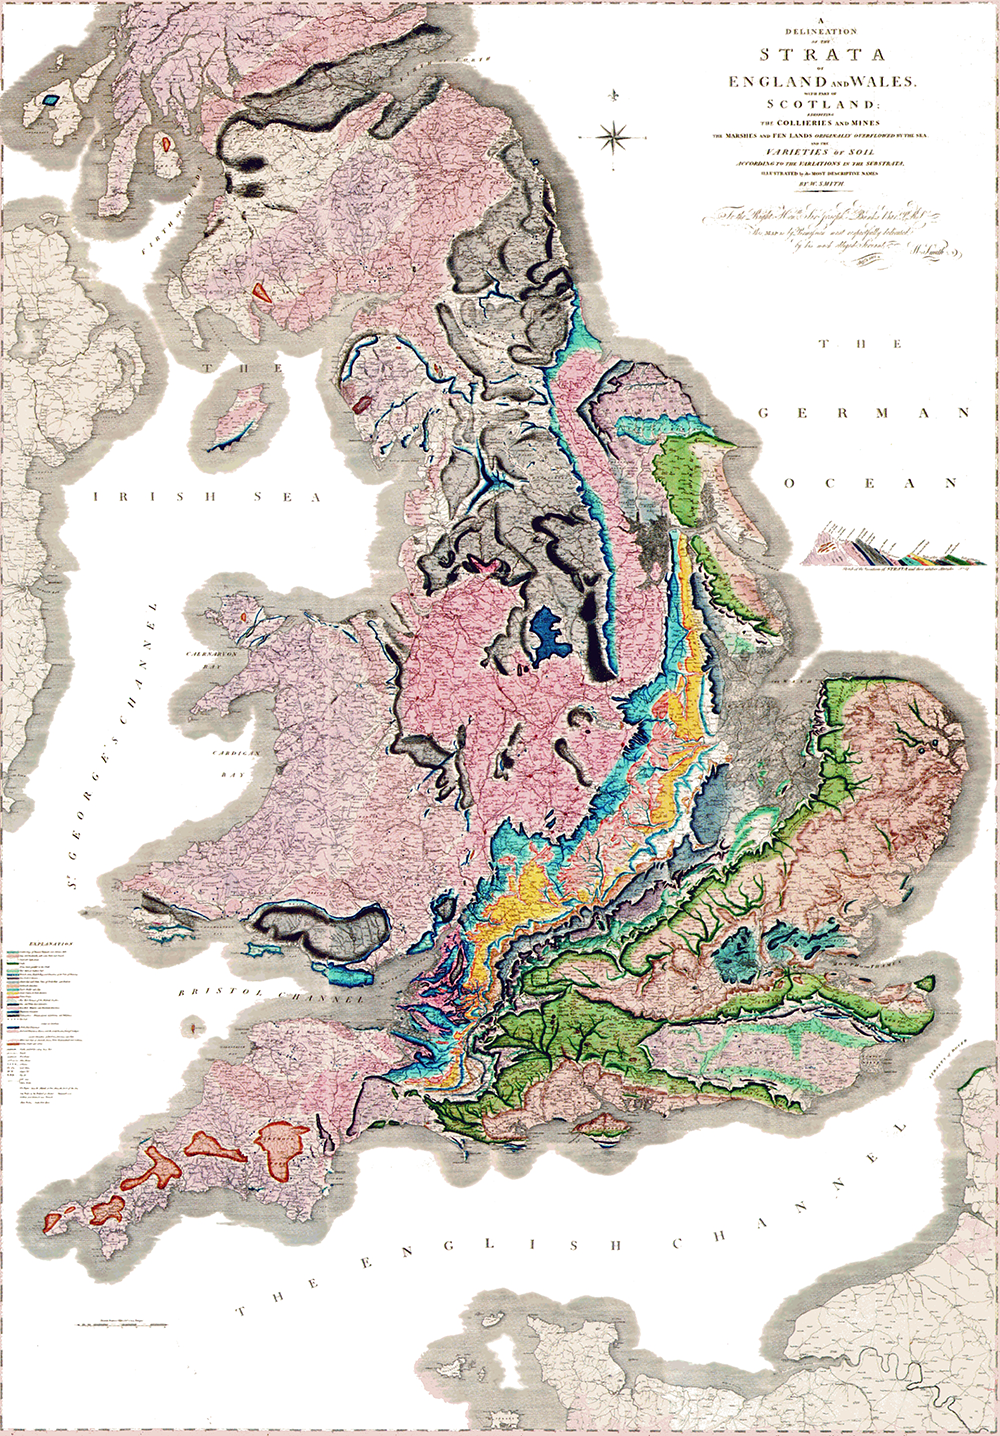 Geological map of England by William "Strata" Smith